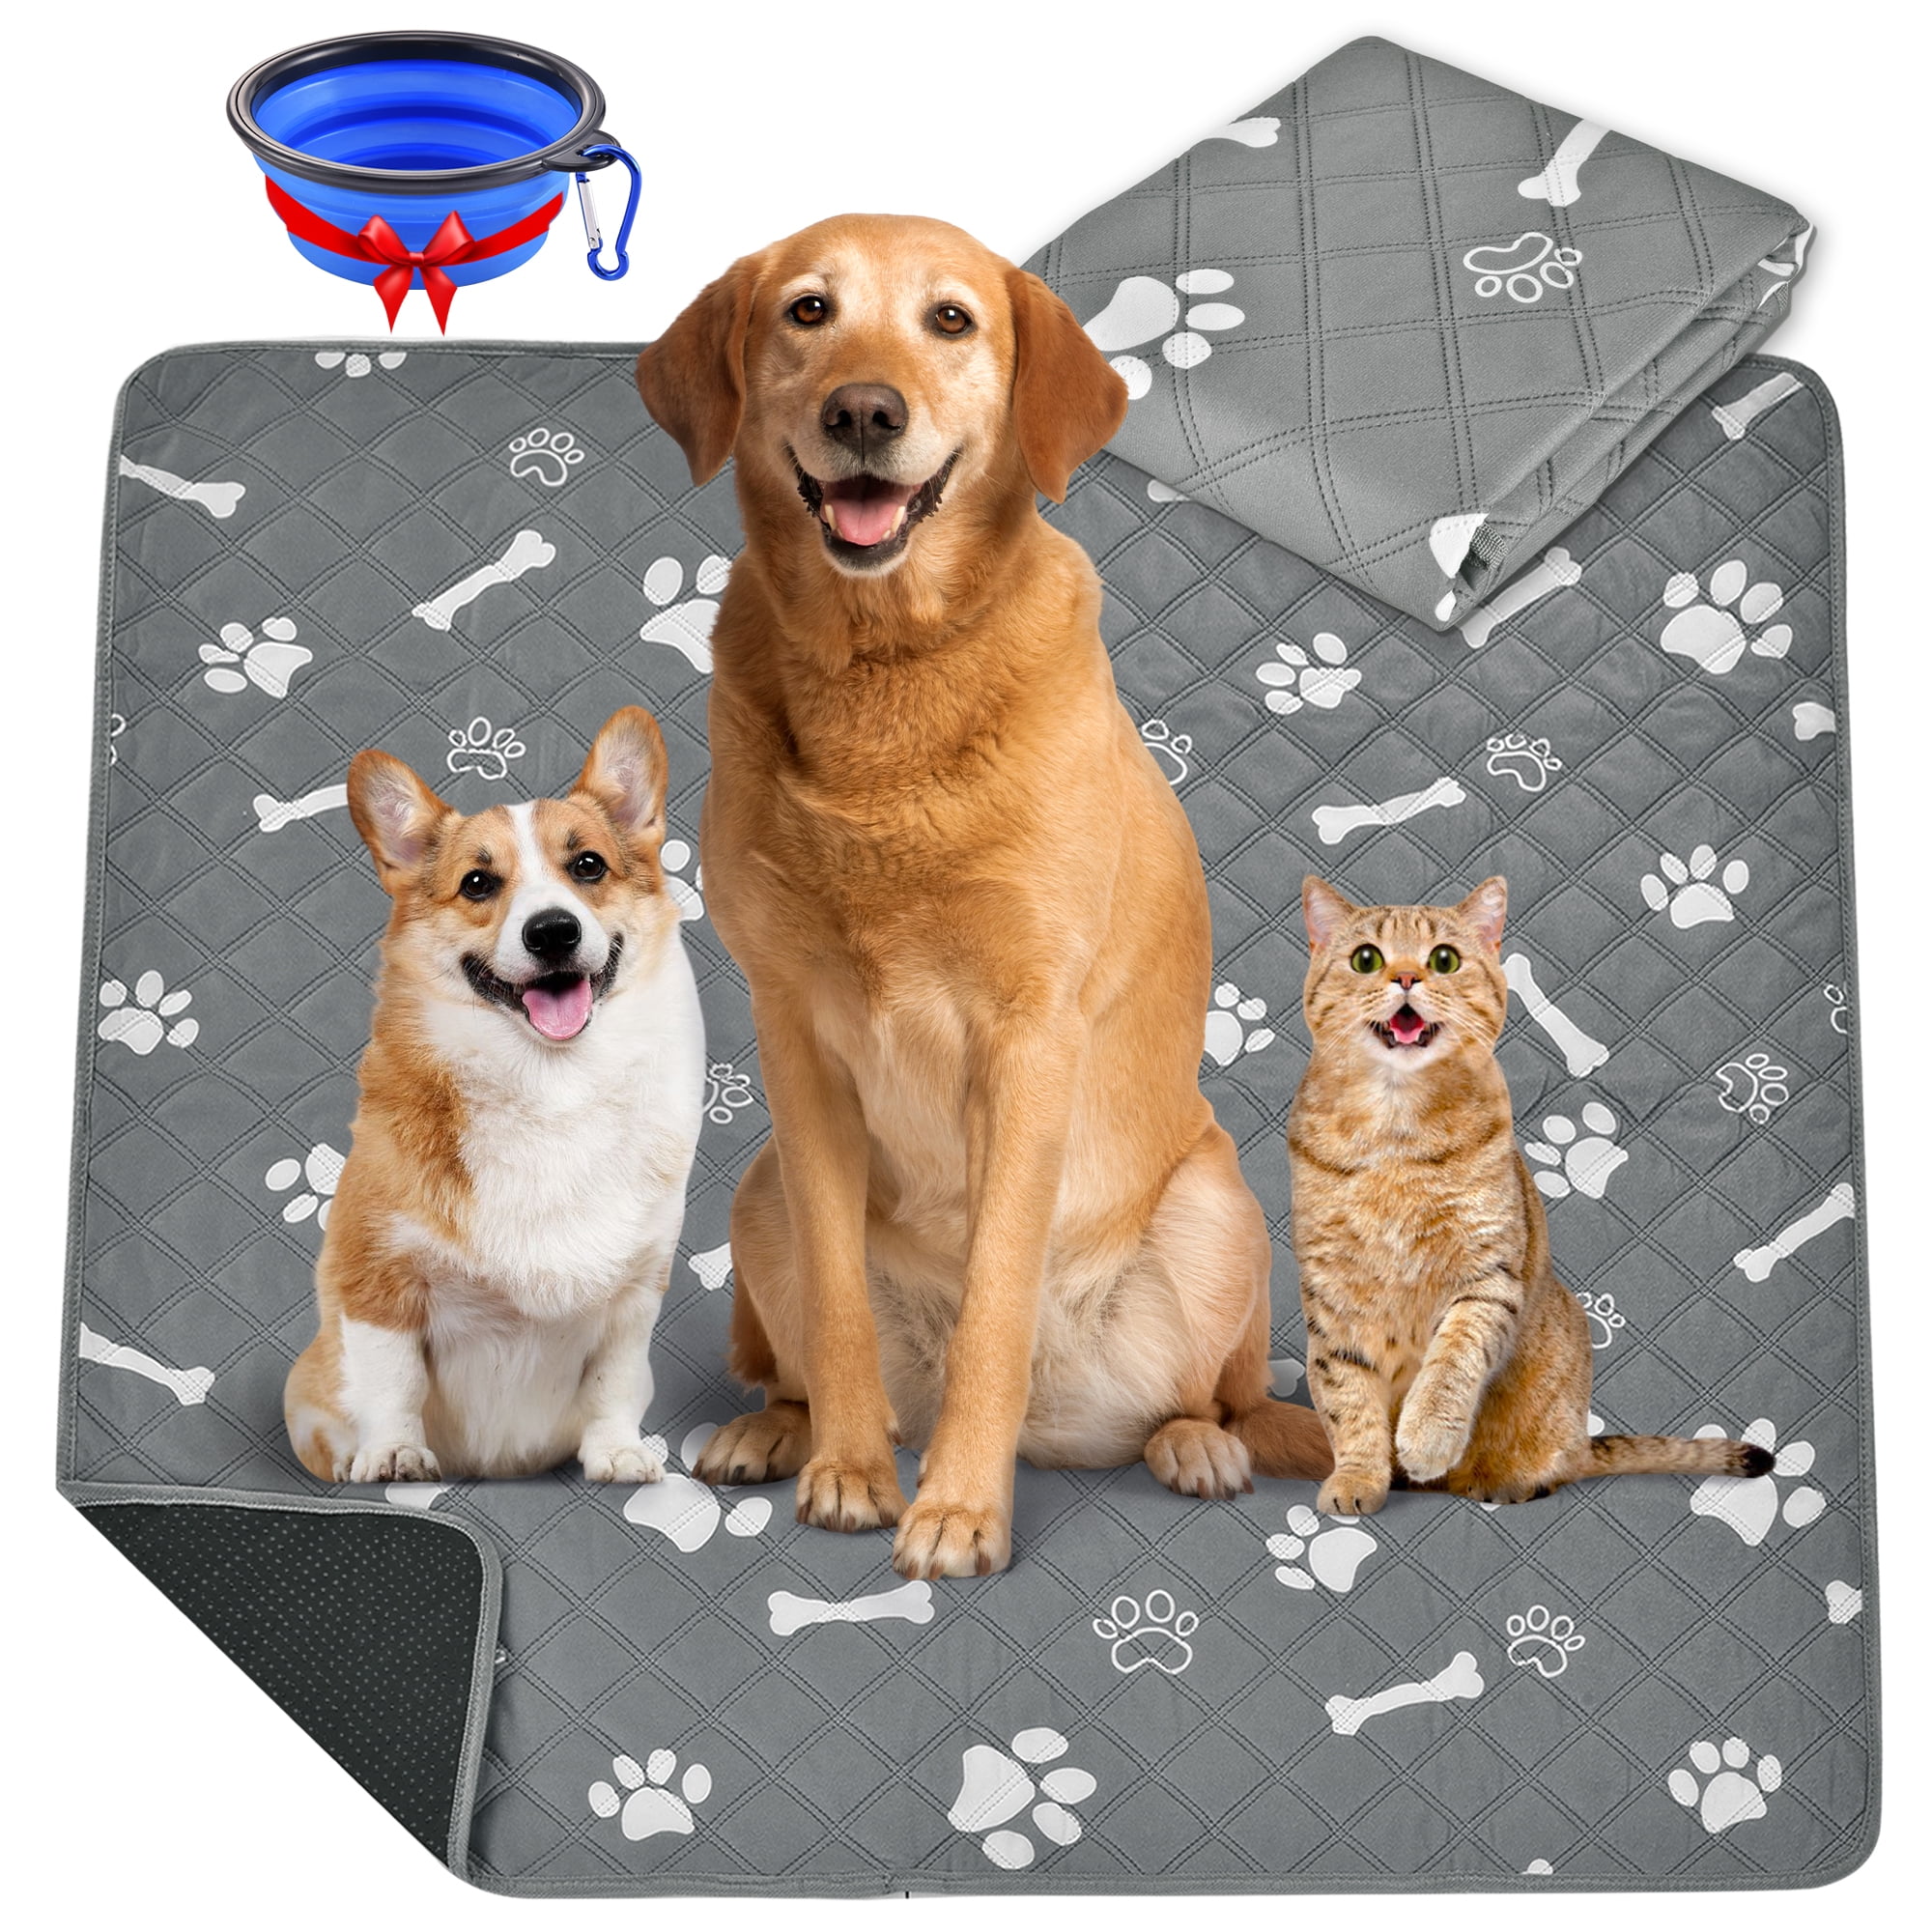 Conkote Reusable Dog Pee Pads Extra Large 48 x 60, Waterproof Pet Pad  Super Absorbent Dog Playpen Pad Mat with Non-Slip Bottom for Puppy  Training